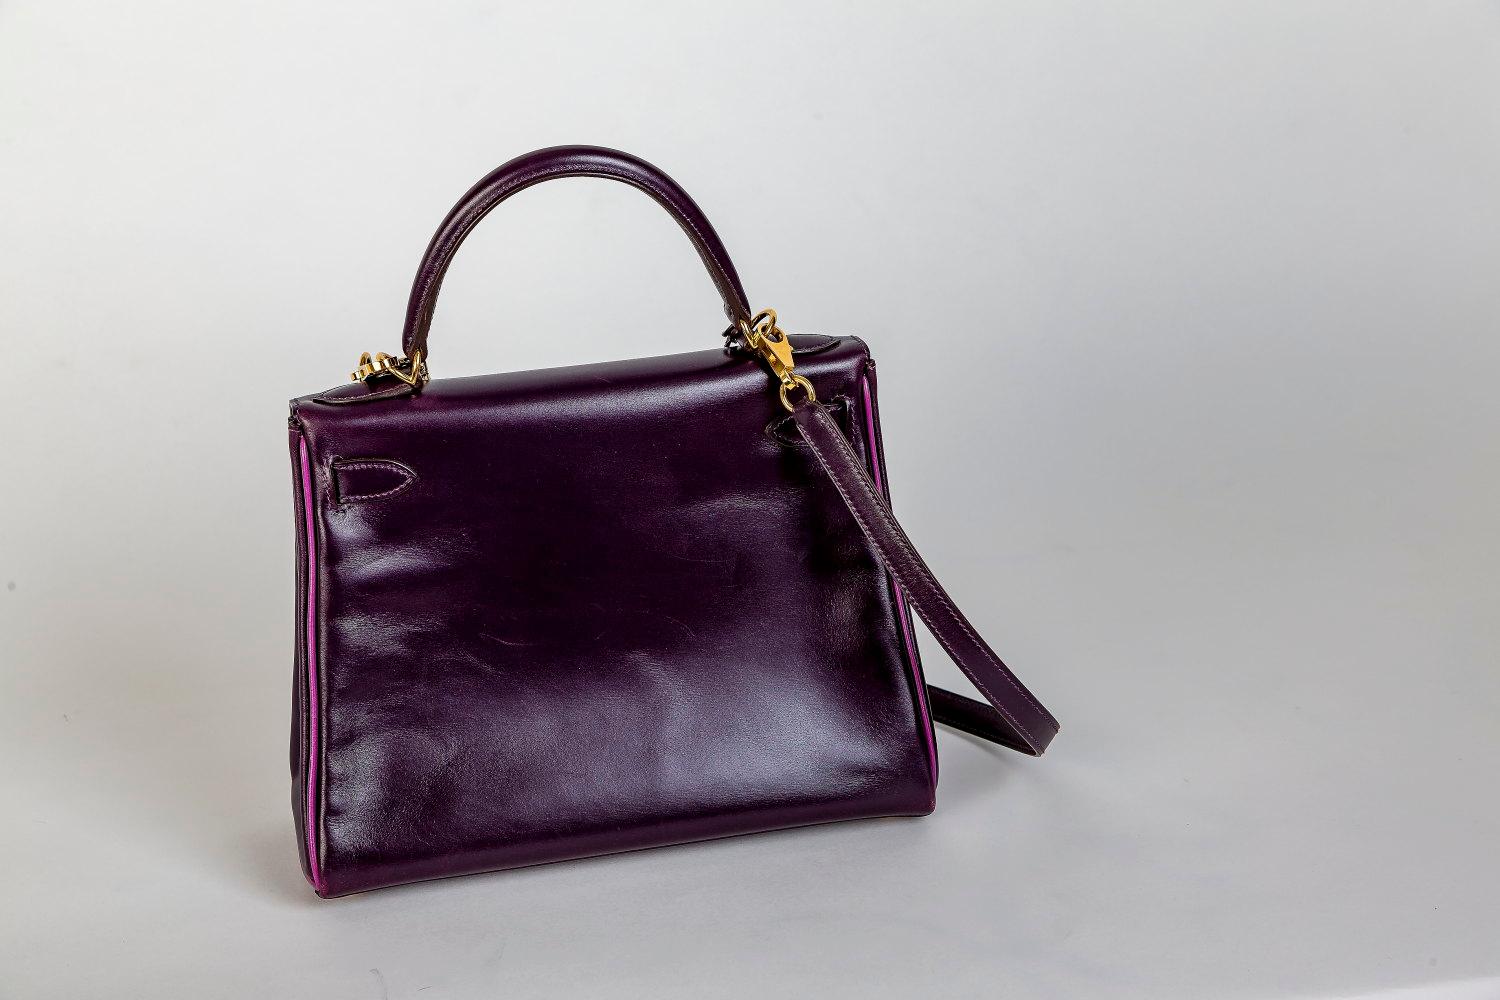 Kelly bag in a very rare purple-pink color with gold hardware. 4 side seams polished with pink leather pass and lined with pink leather inside. It is a SPECIAL EDITION! The bag comes with 90 cm long shoulder strap clochette and keys and dust bag .